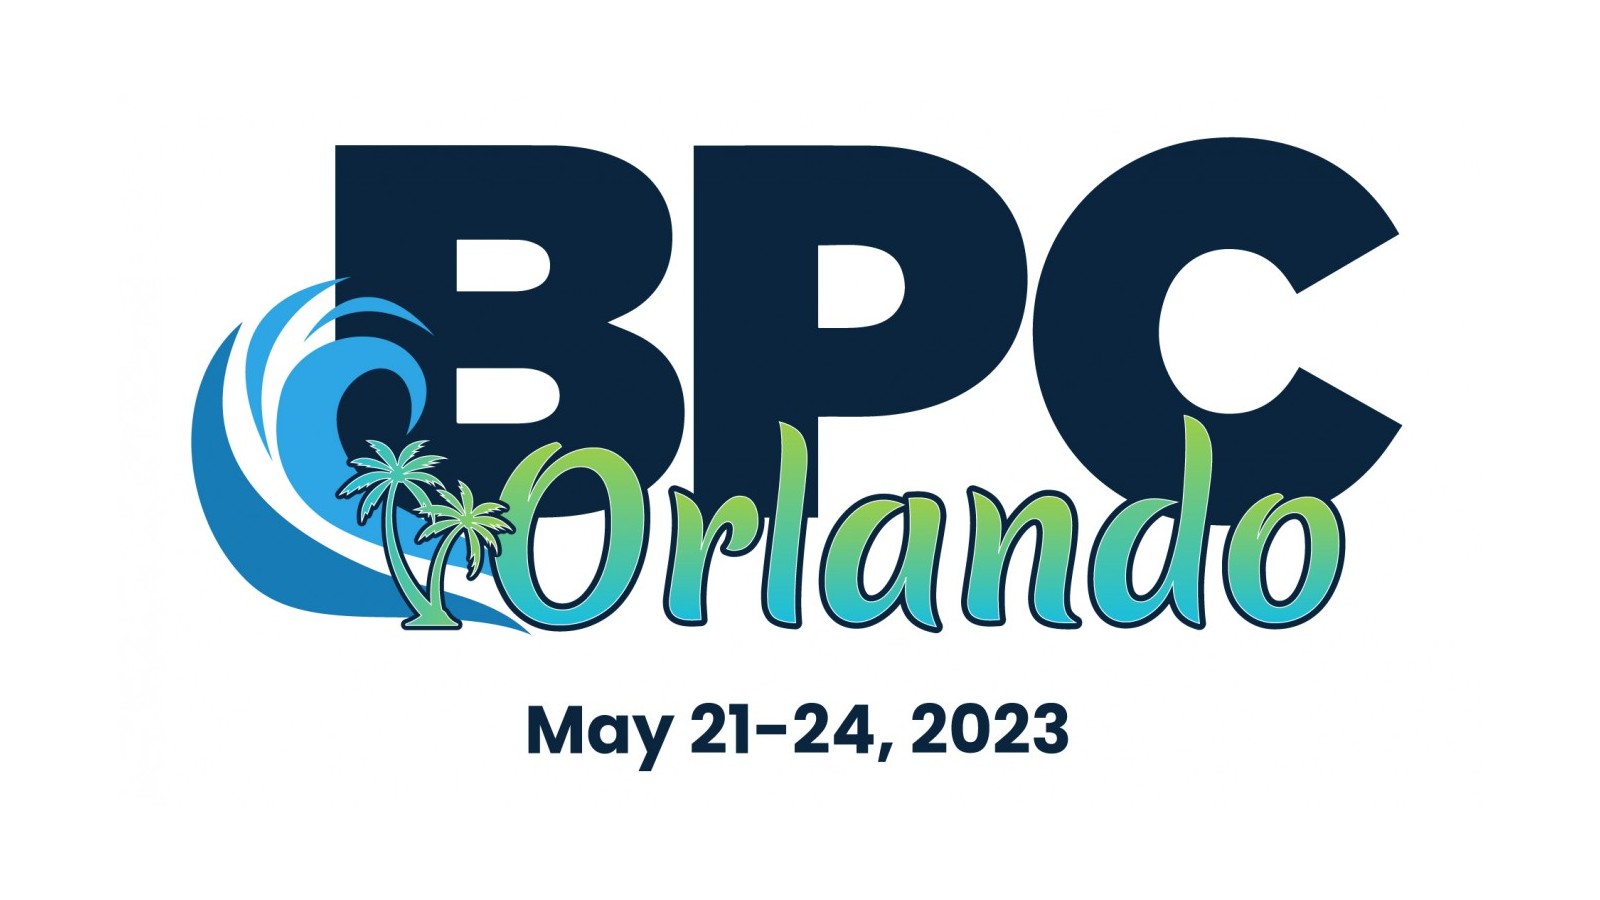 Register to Win a $10K Business Development Apprenticeship at OST’s Booth at BPC Orlando May 21-23, 2023